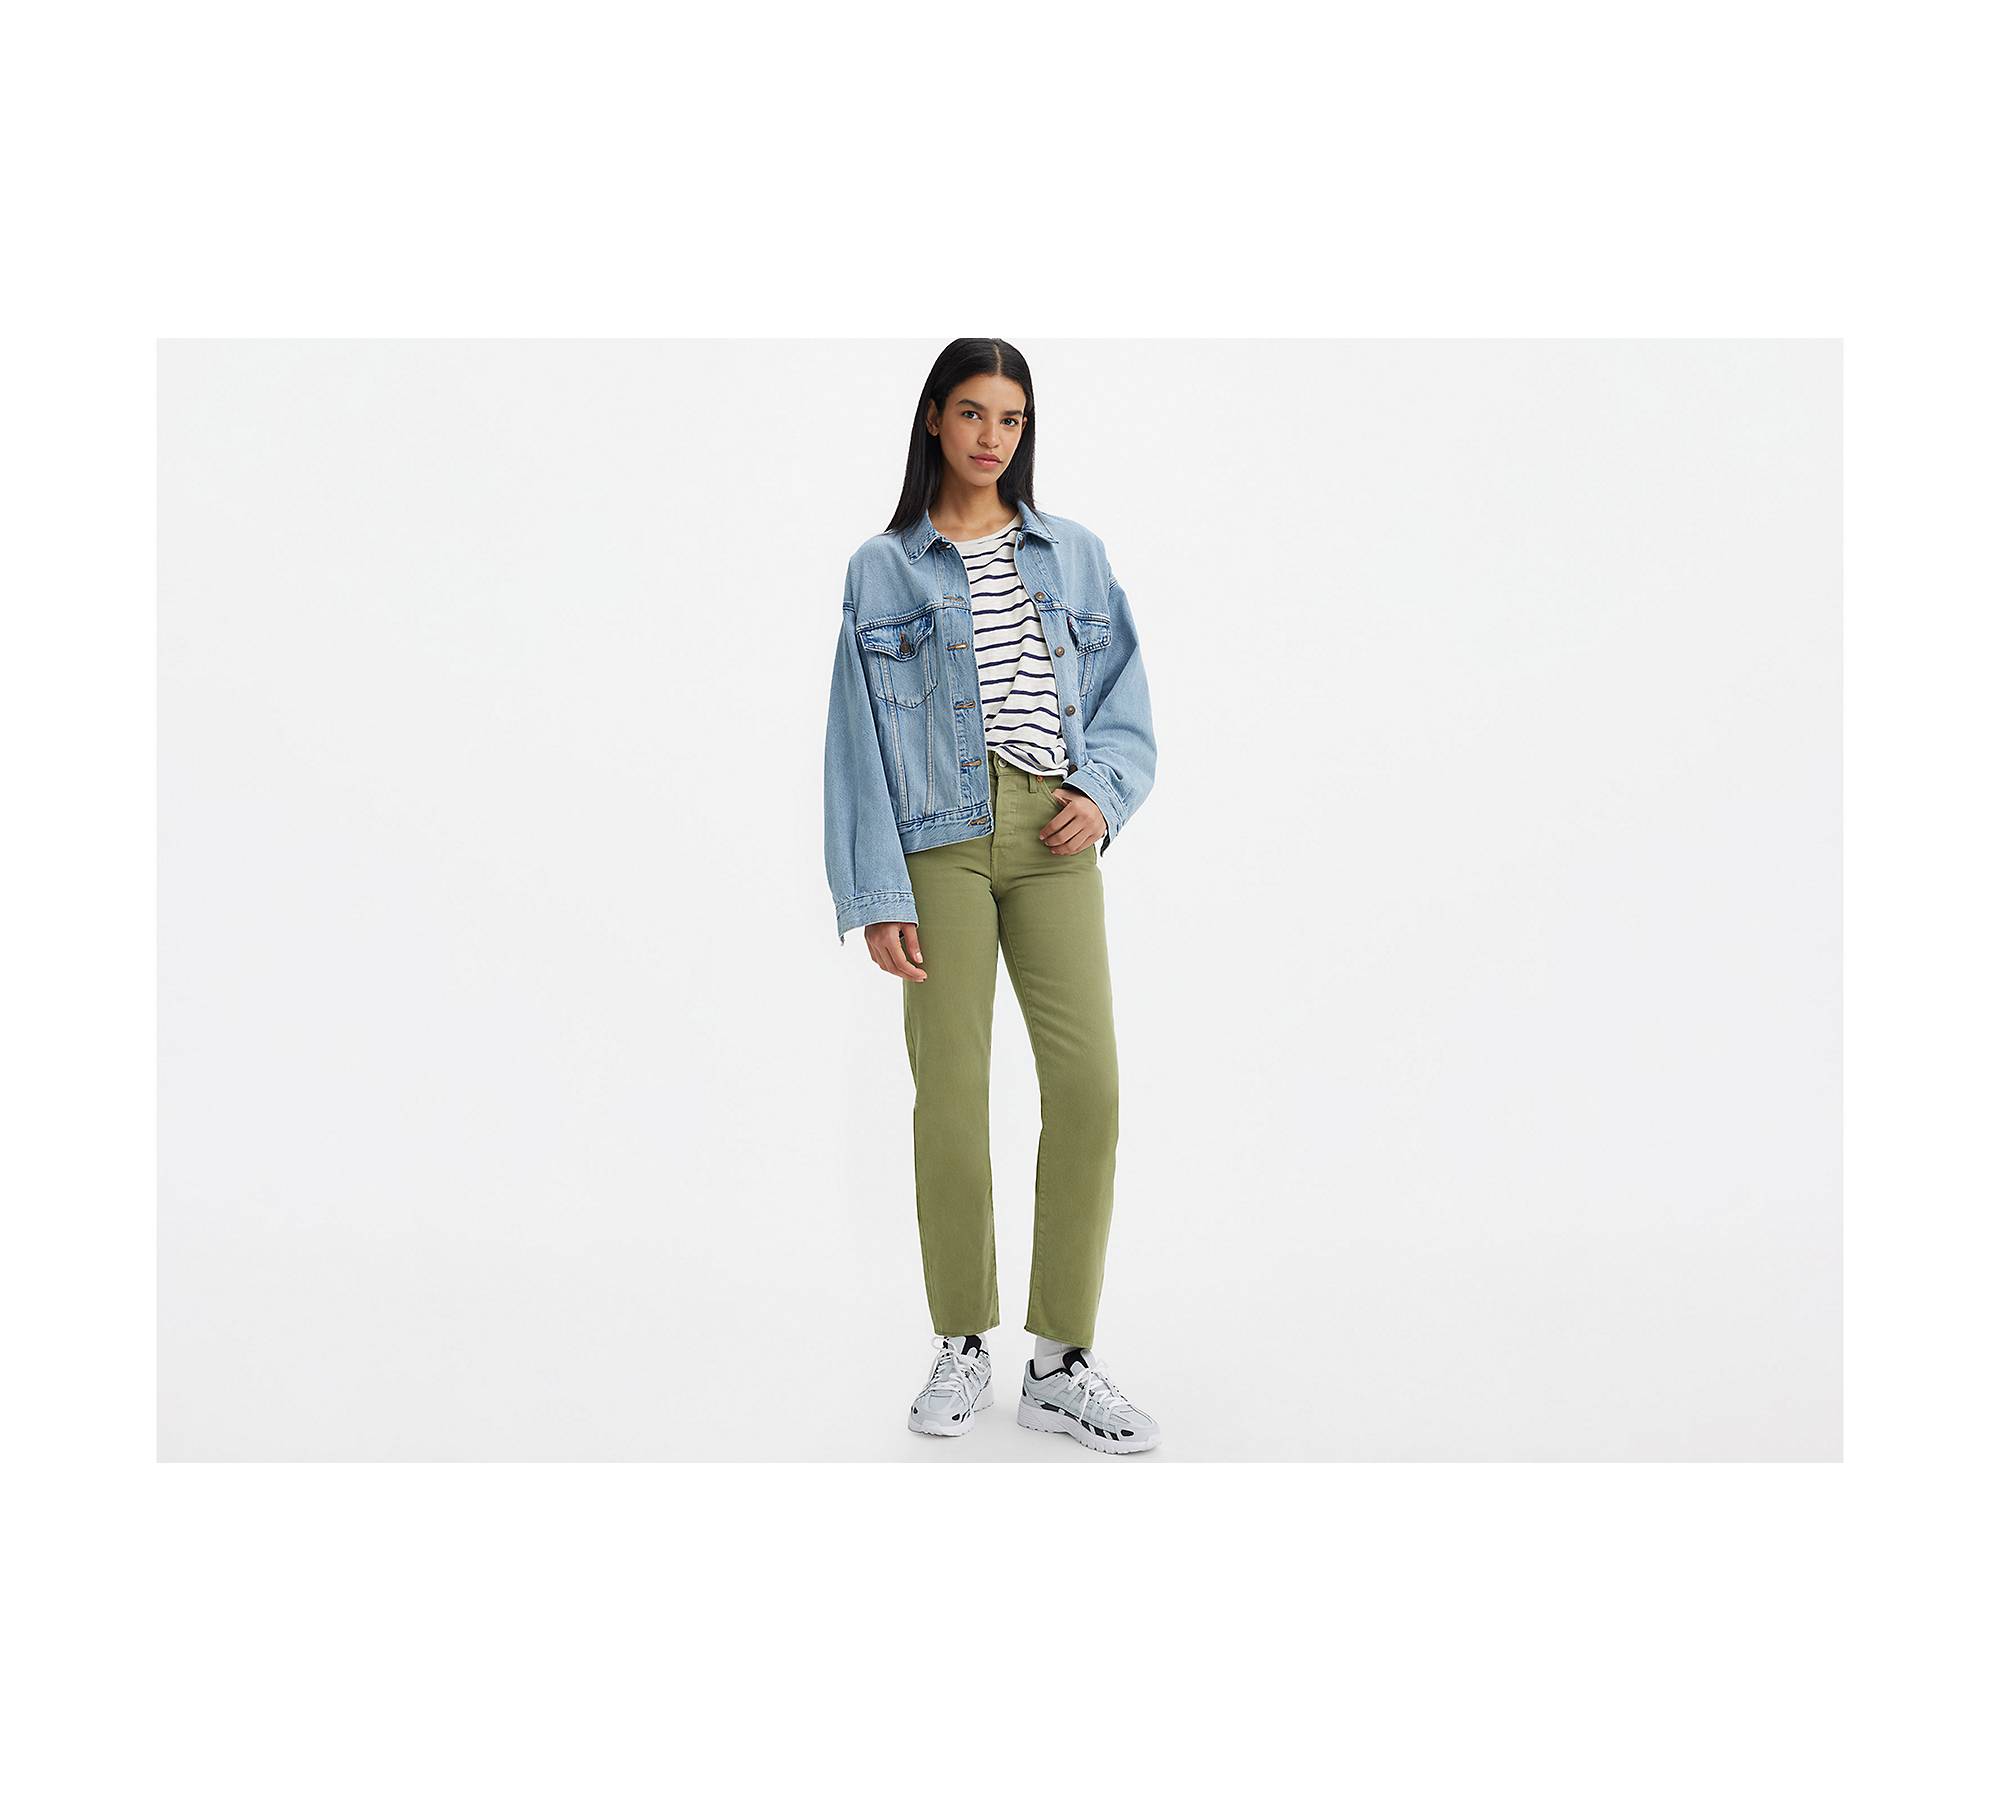 Wedgie Straight Fit Women's Jeans - Green | Levi's® US